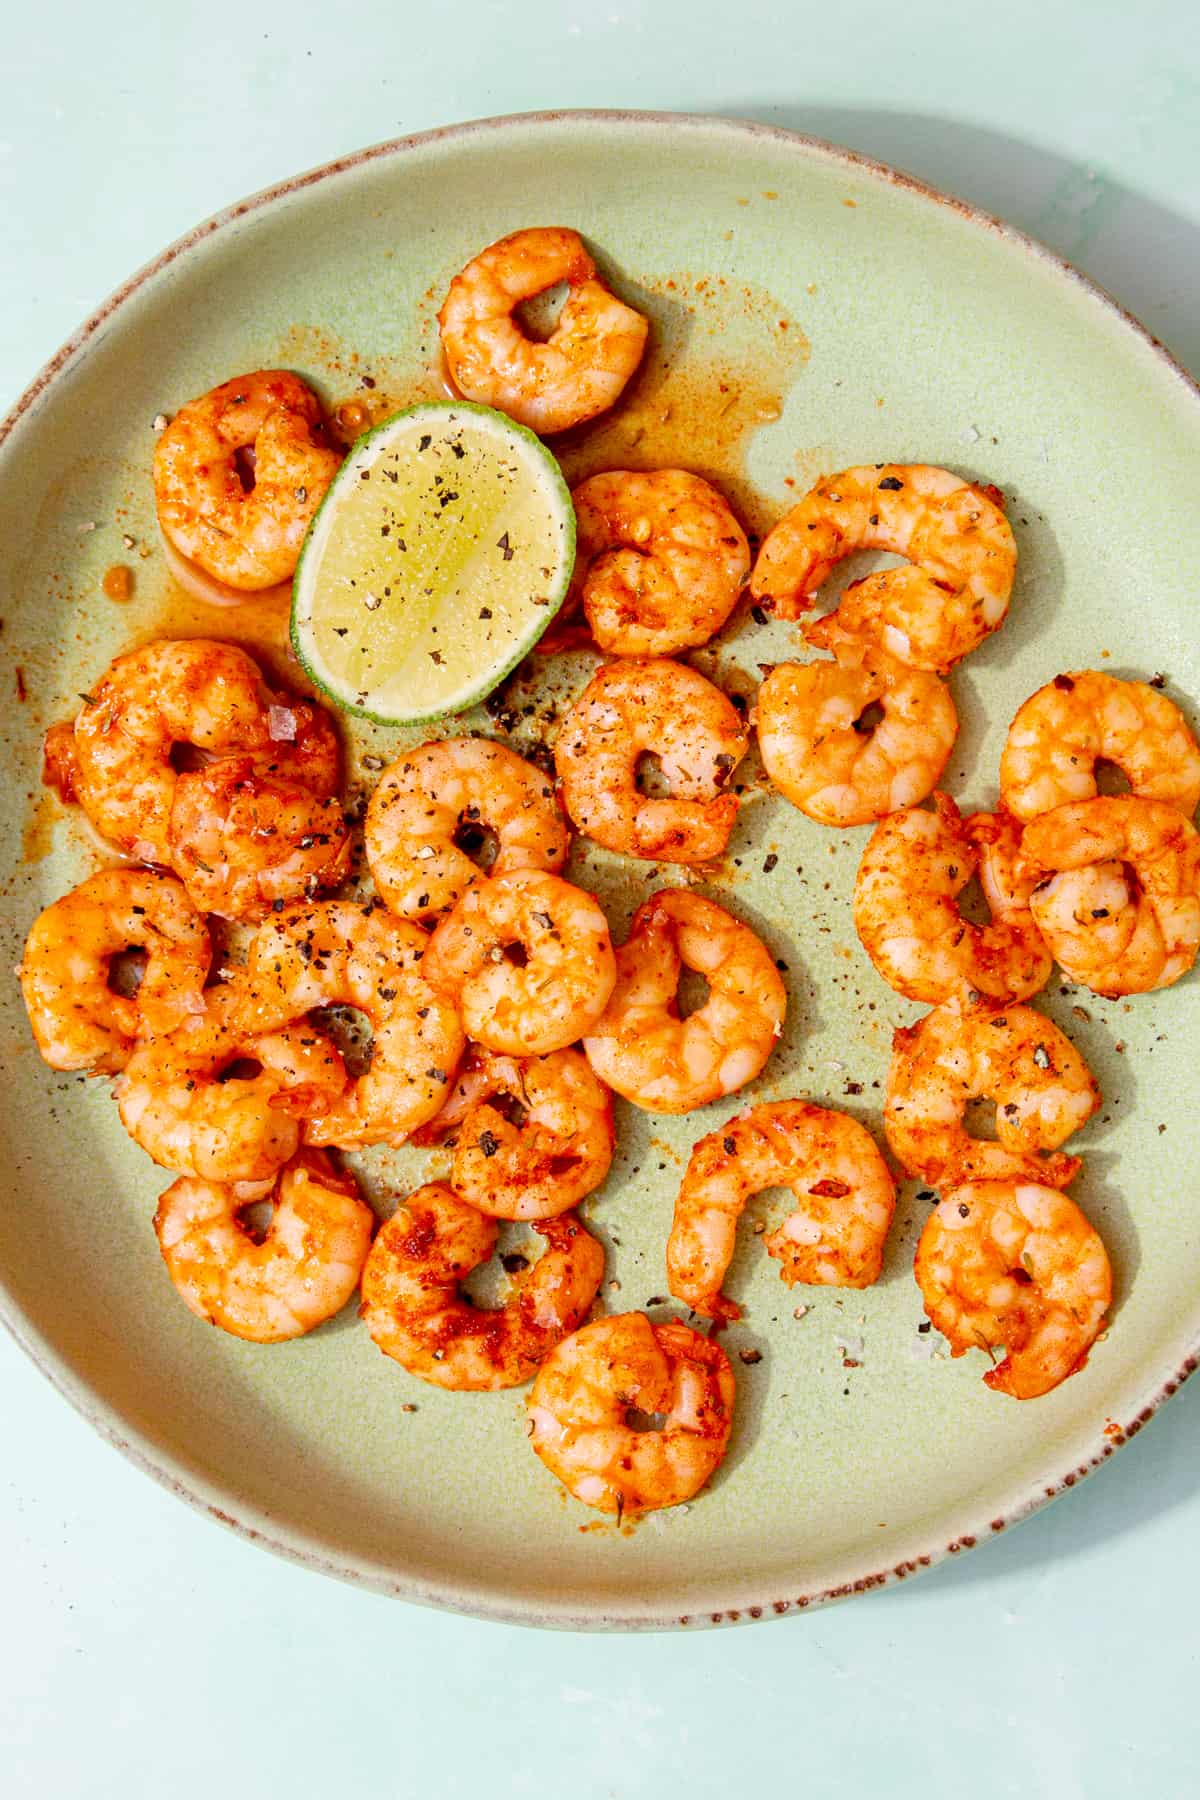 Seasoned King prawns in a bowl with a lime wedge and topped with some extra seasoning.